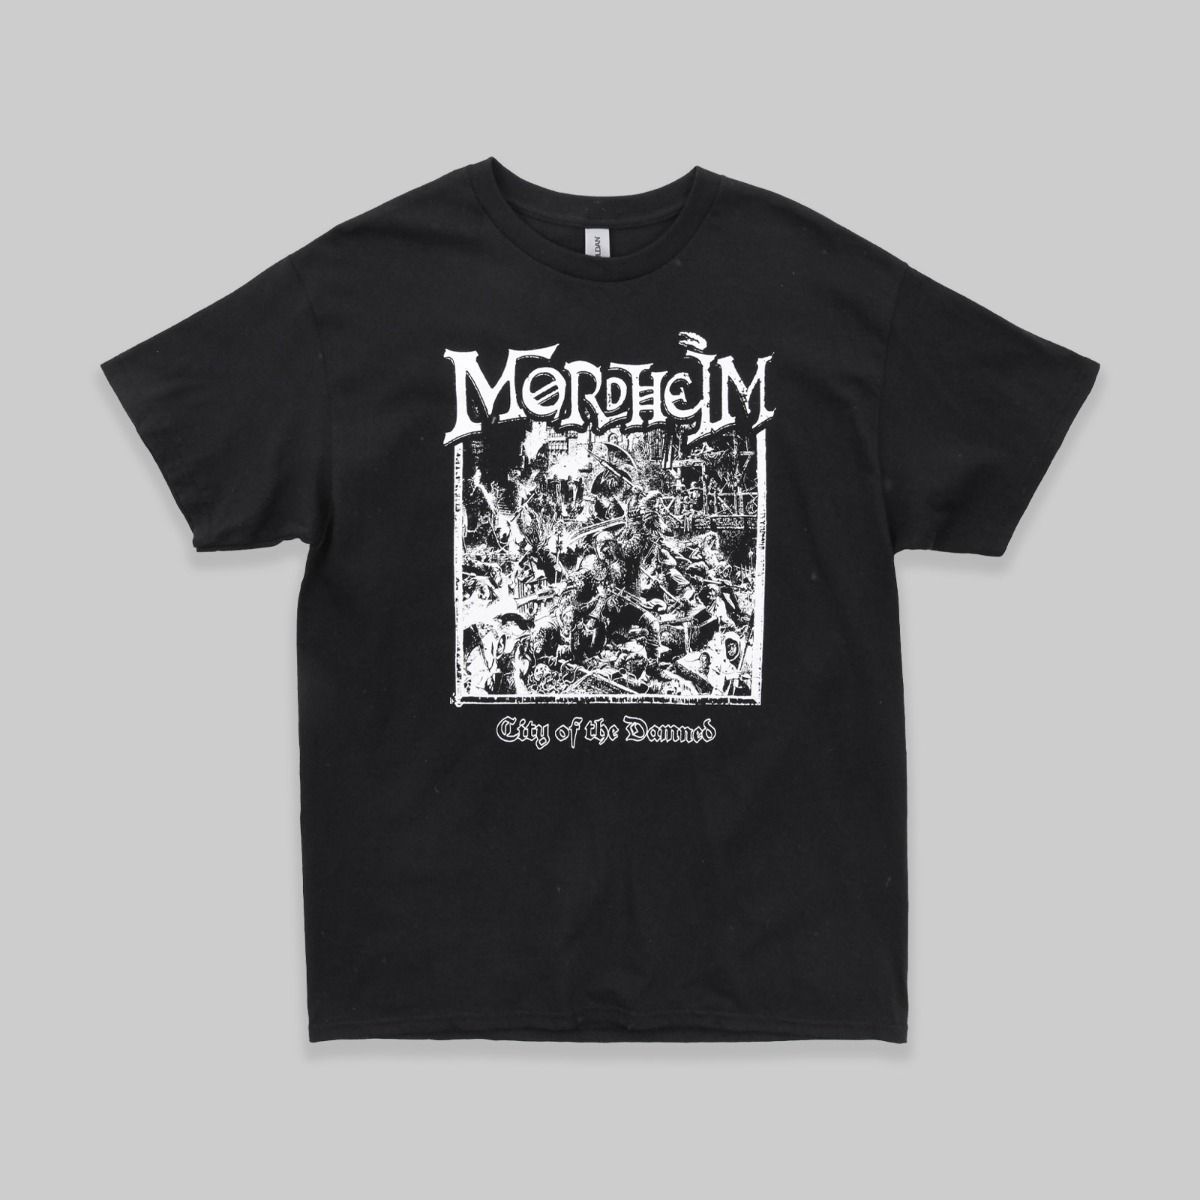 Mordheim City of the Damned T-Shirt